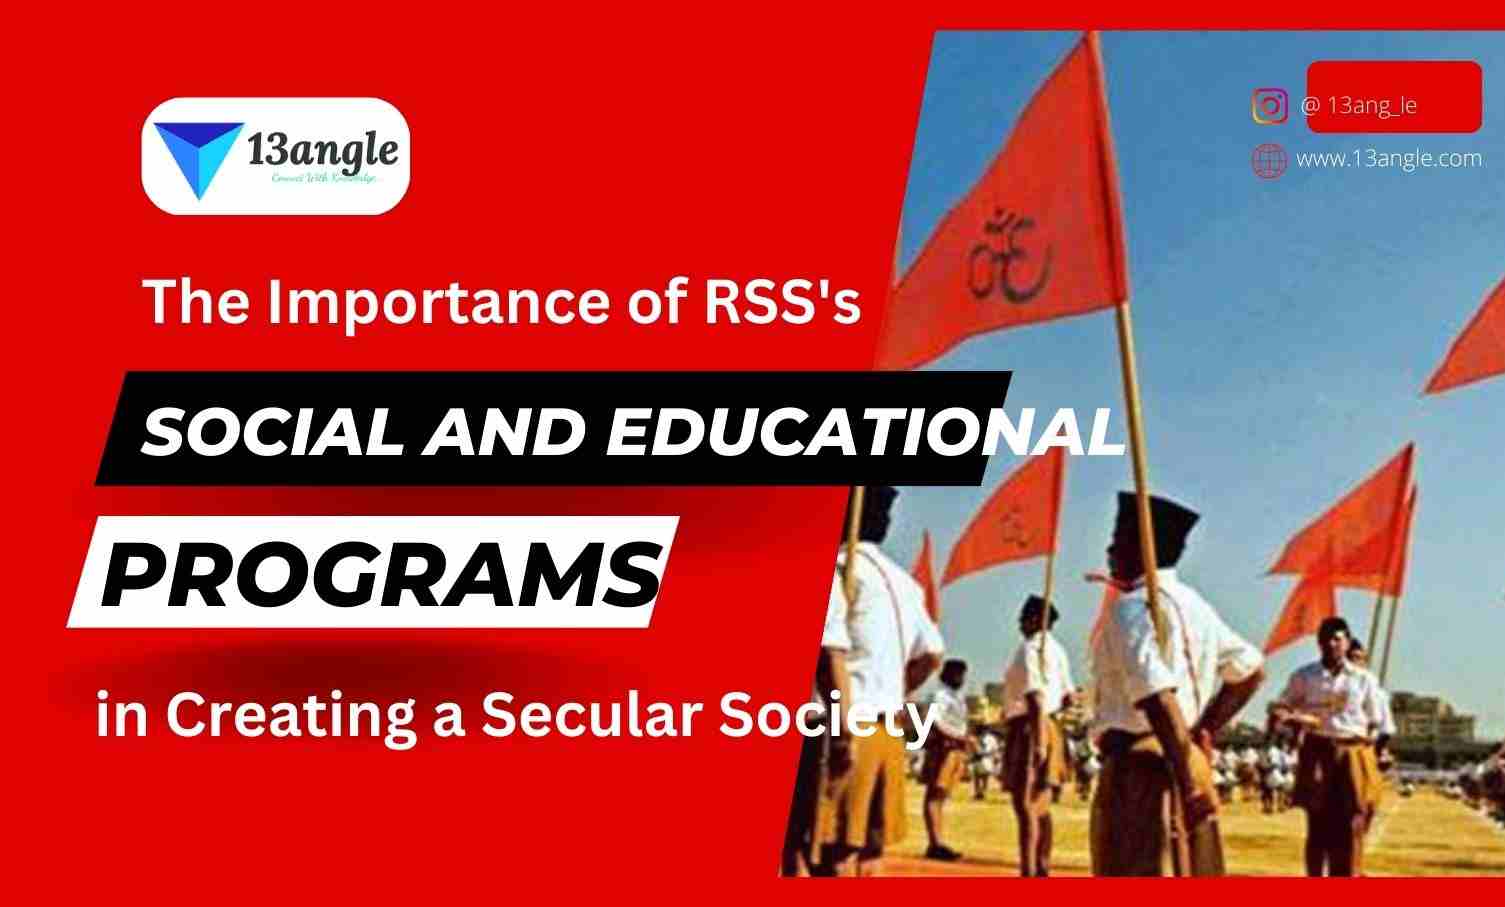 The Importance of RSS's Social and Educational Programs in Creating a Secular Society- 13angle.com